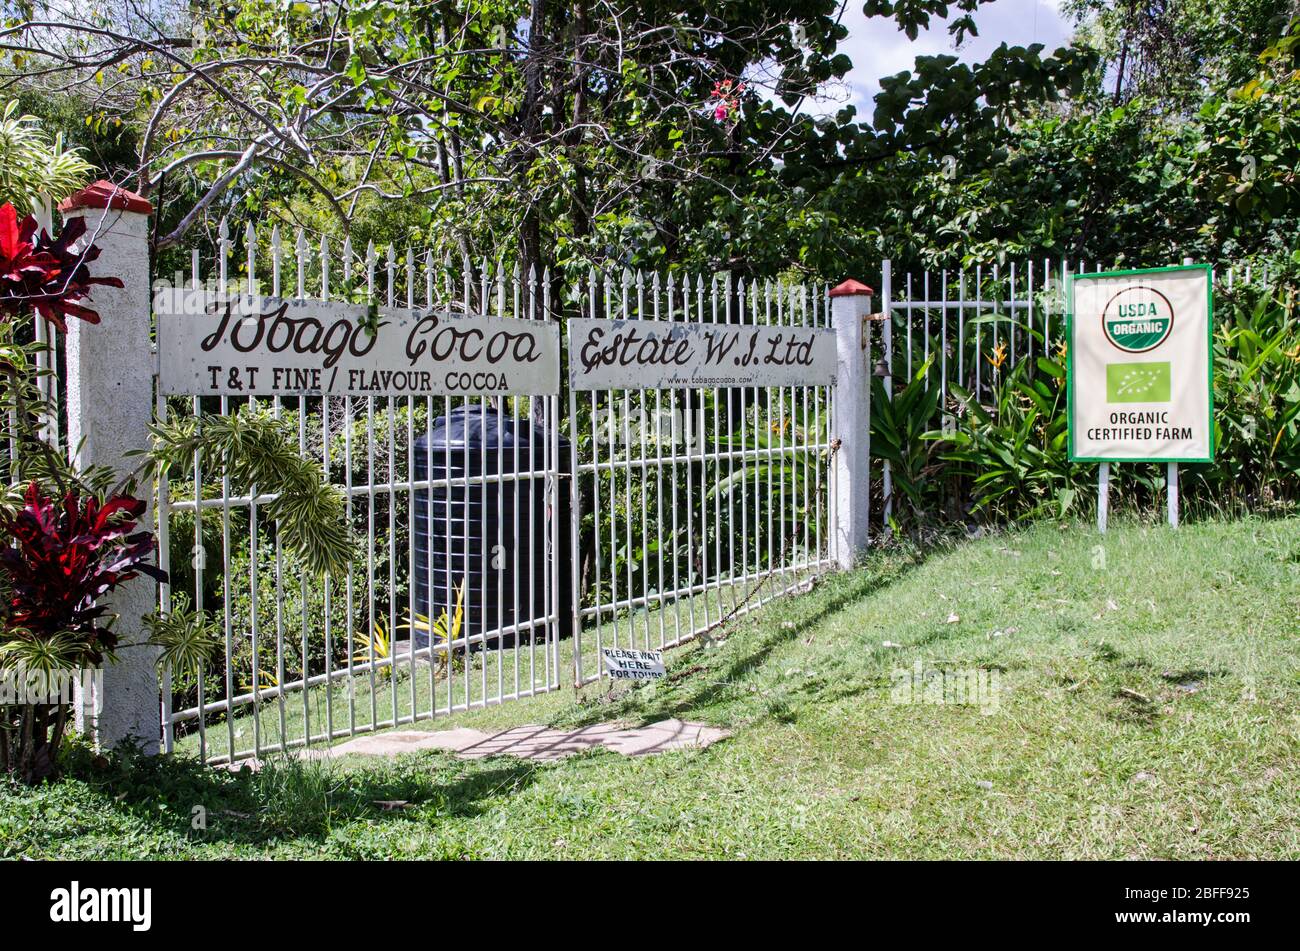 Roxborough, Trinidad and Tobago - January 10, 2020: Gates at the entrance to the Tobago Cocoa Estate which produces organic cocoa beans for the chocol Stock Photo